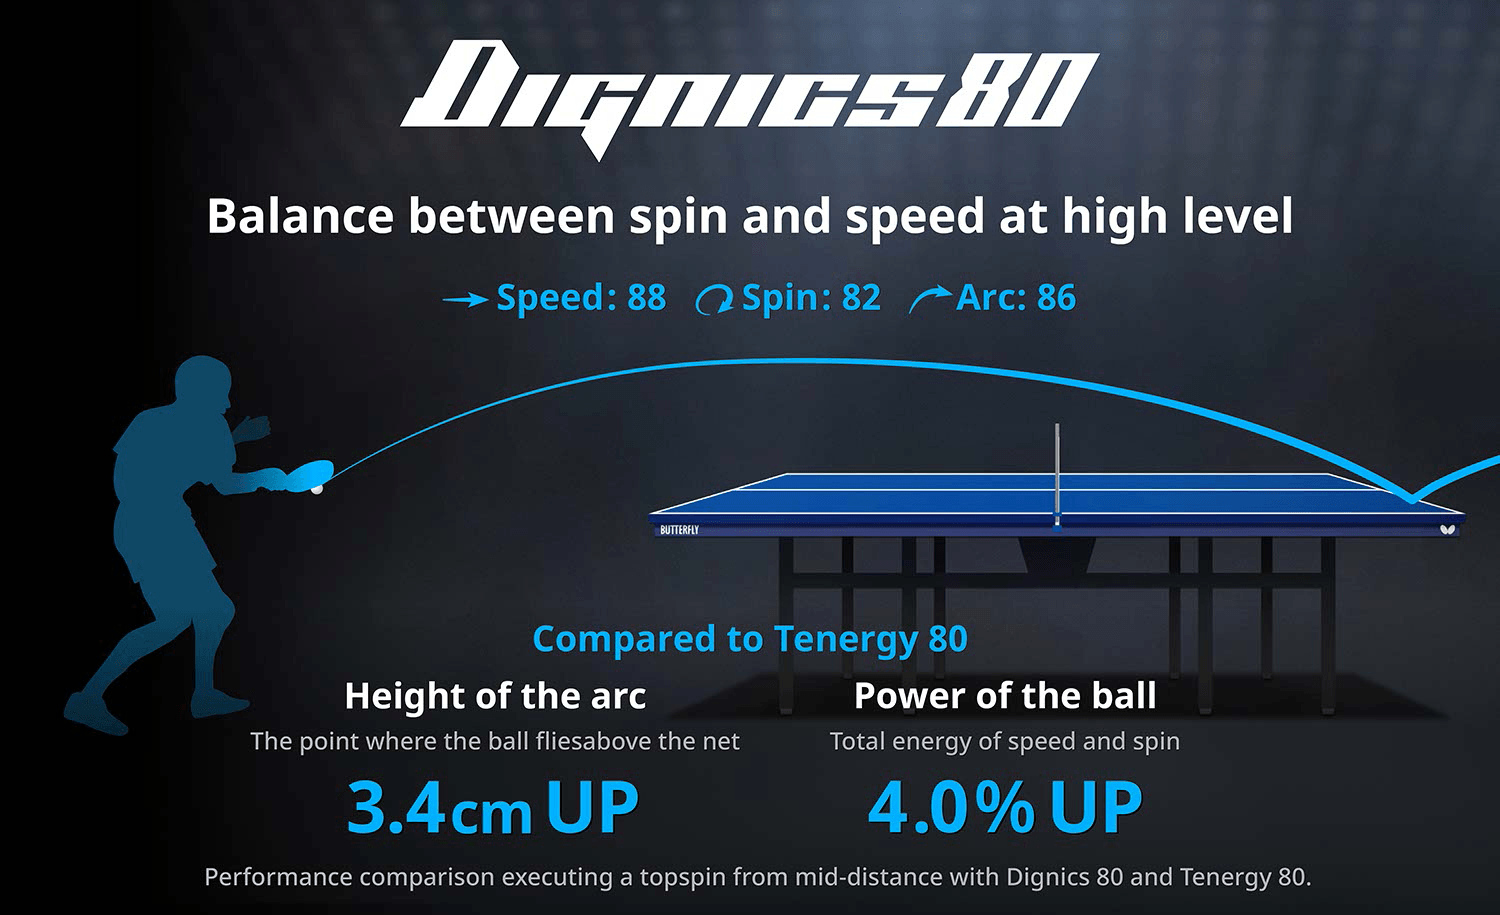 Dignics80 Speed13.75/Spin11.75